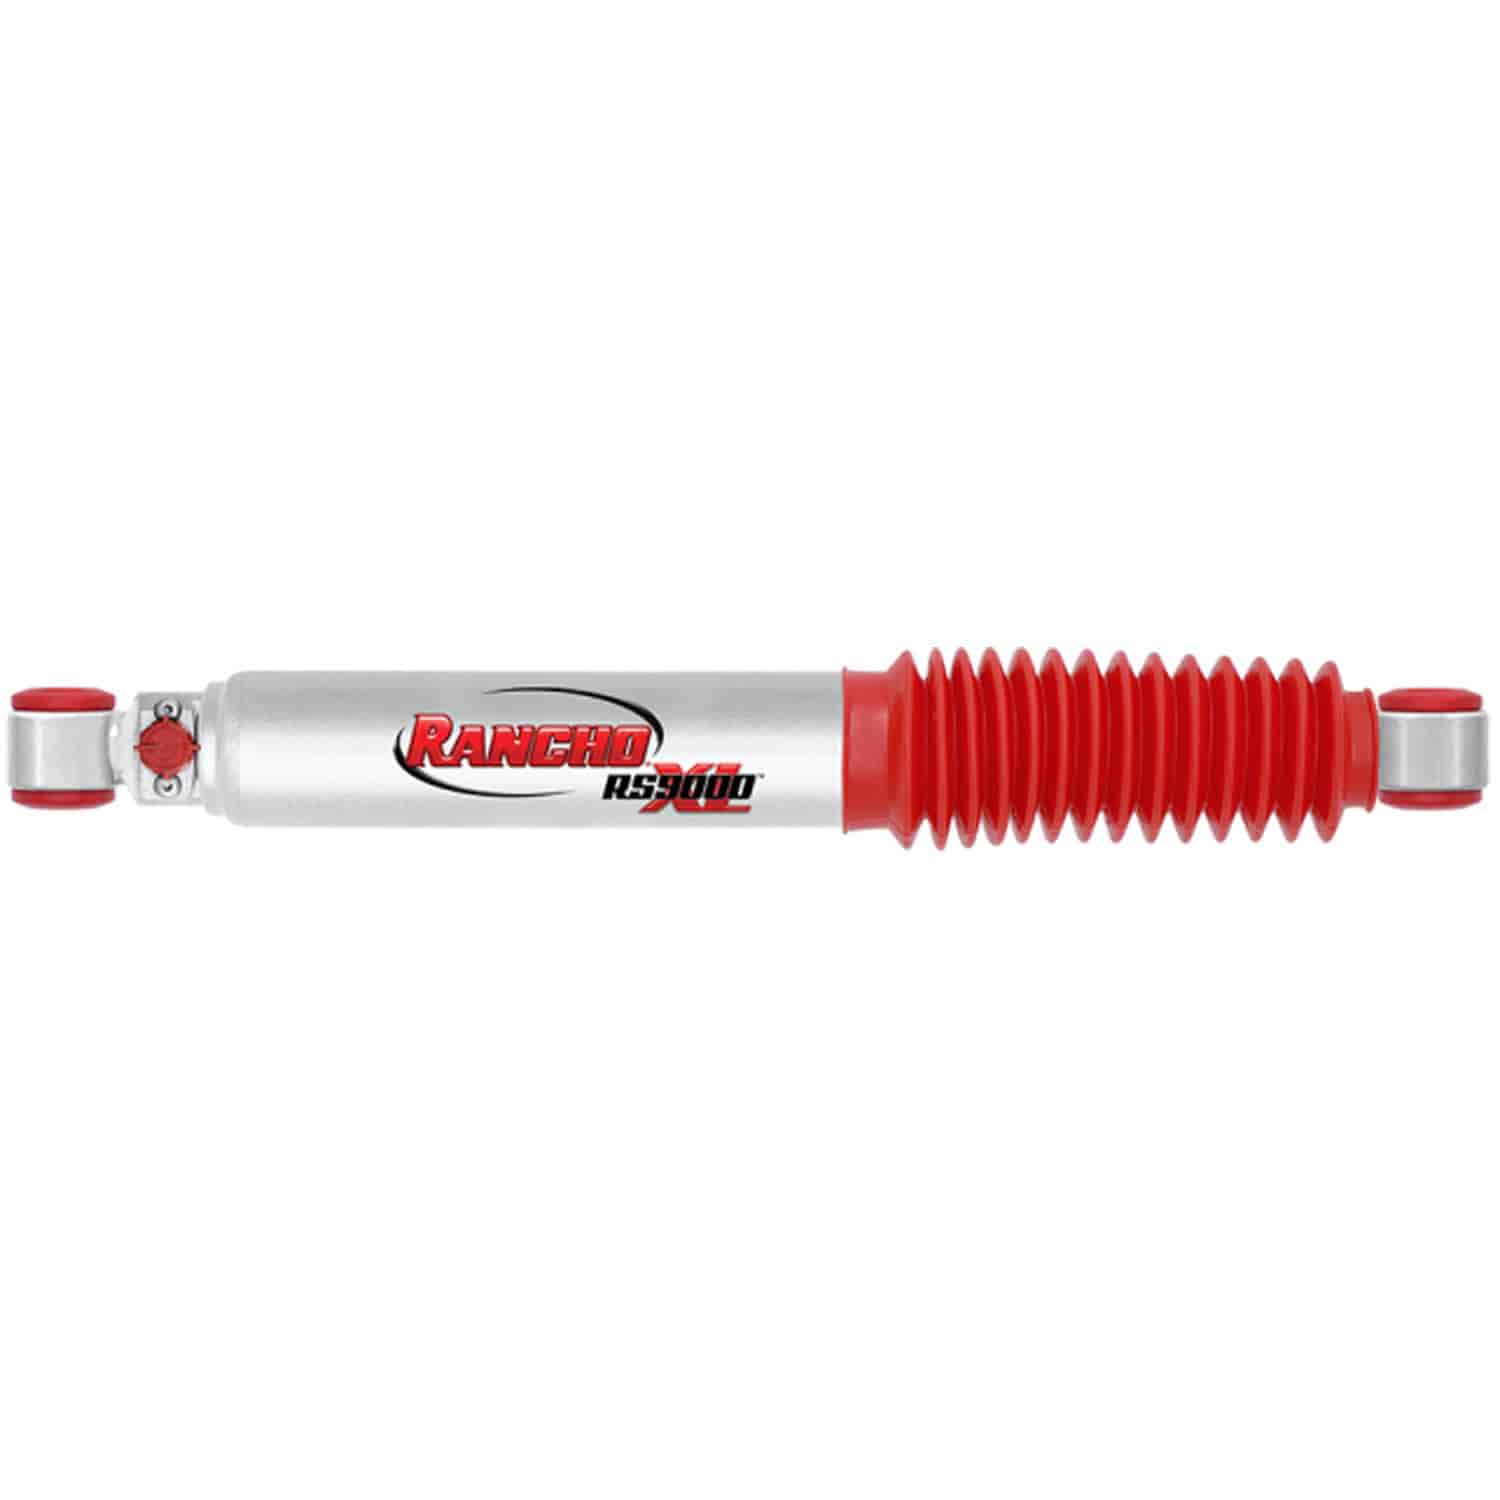 RS9000XL Rear Shock Absorber Fits for Nissan Patrol GR, Safari and Toyota Land Cruiser